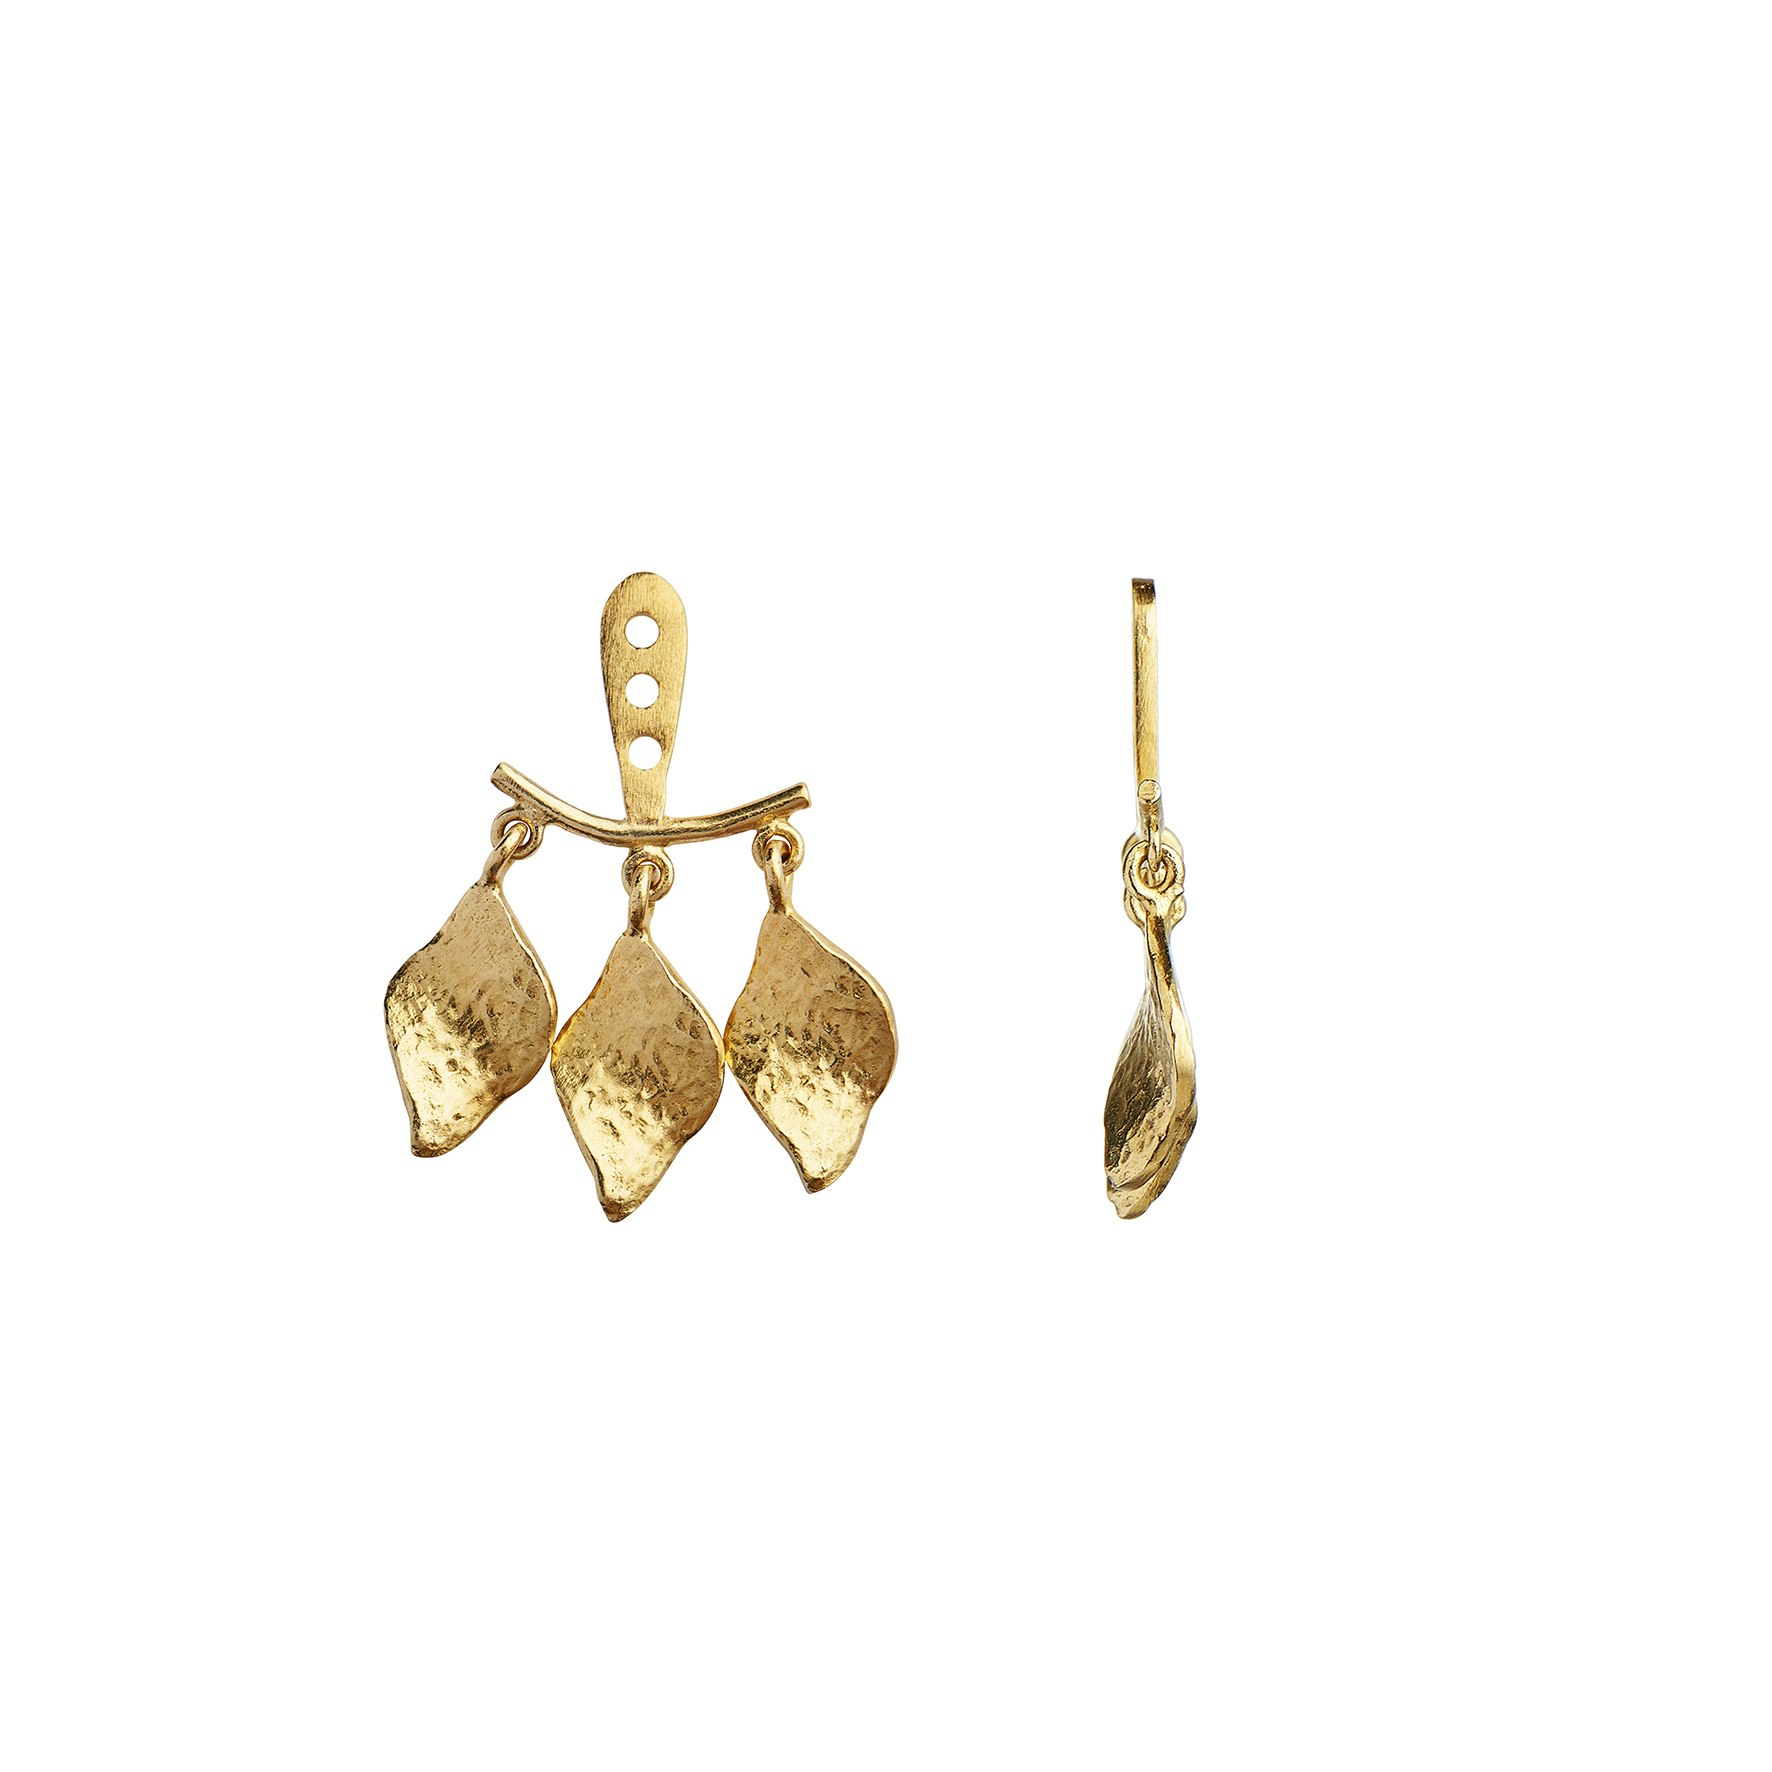 Dancing Three Ile De L'Amour Behind Ear Earring from STINE A Jewelry in Goldplated Silver Sterling 925